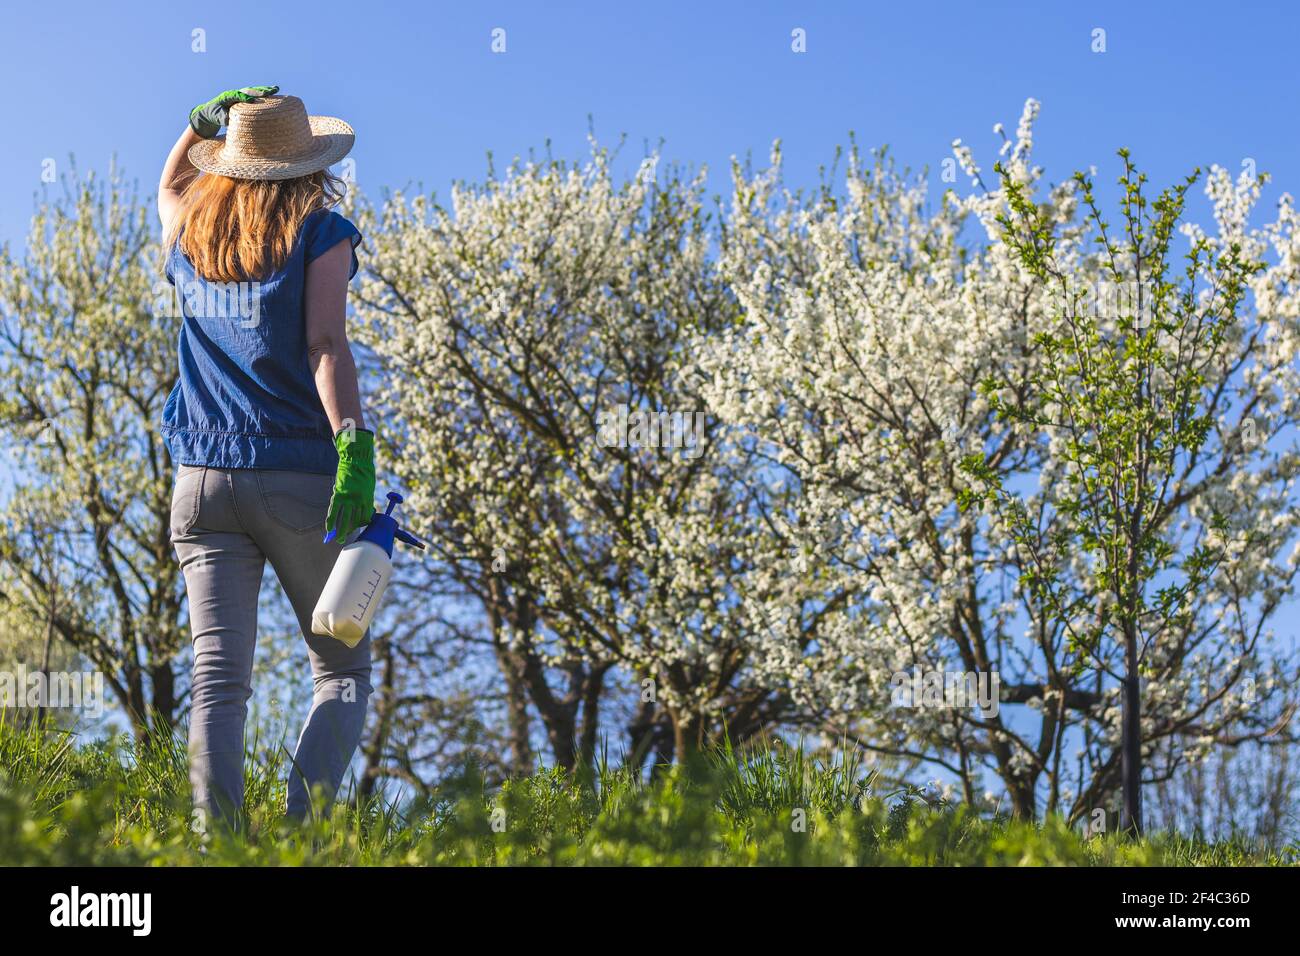 Woman farmer wearing gardening glove and straw hat is holding spray bottle and standing in blossoming orchard. Gardening at springtime. Stock Photo